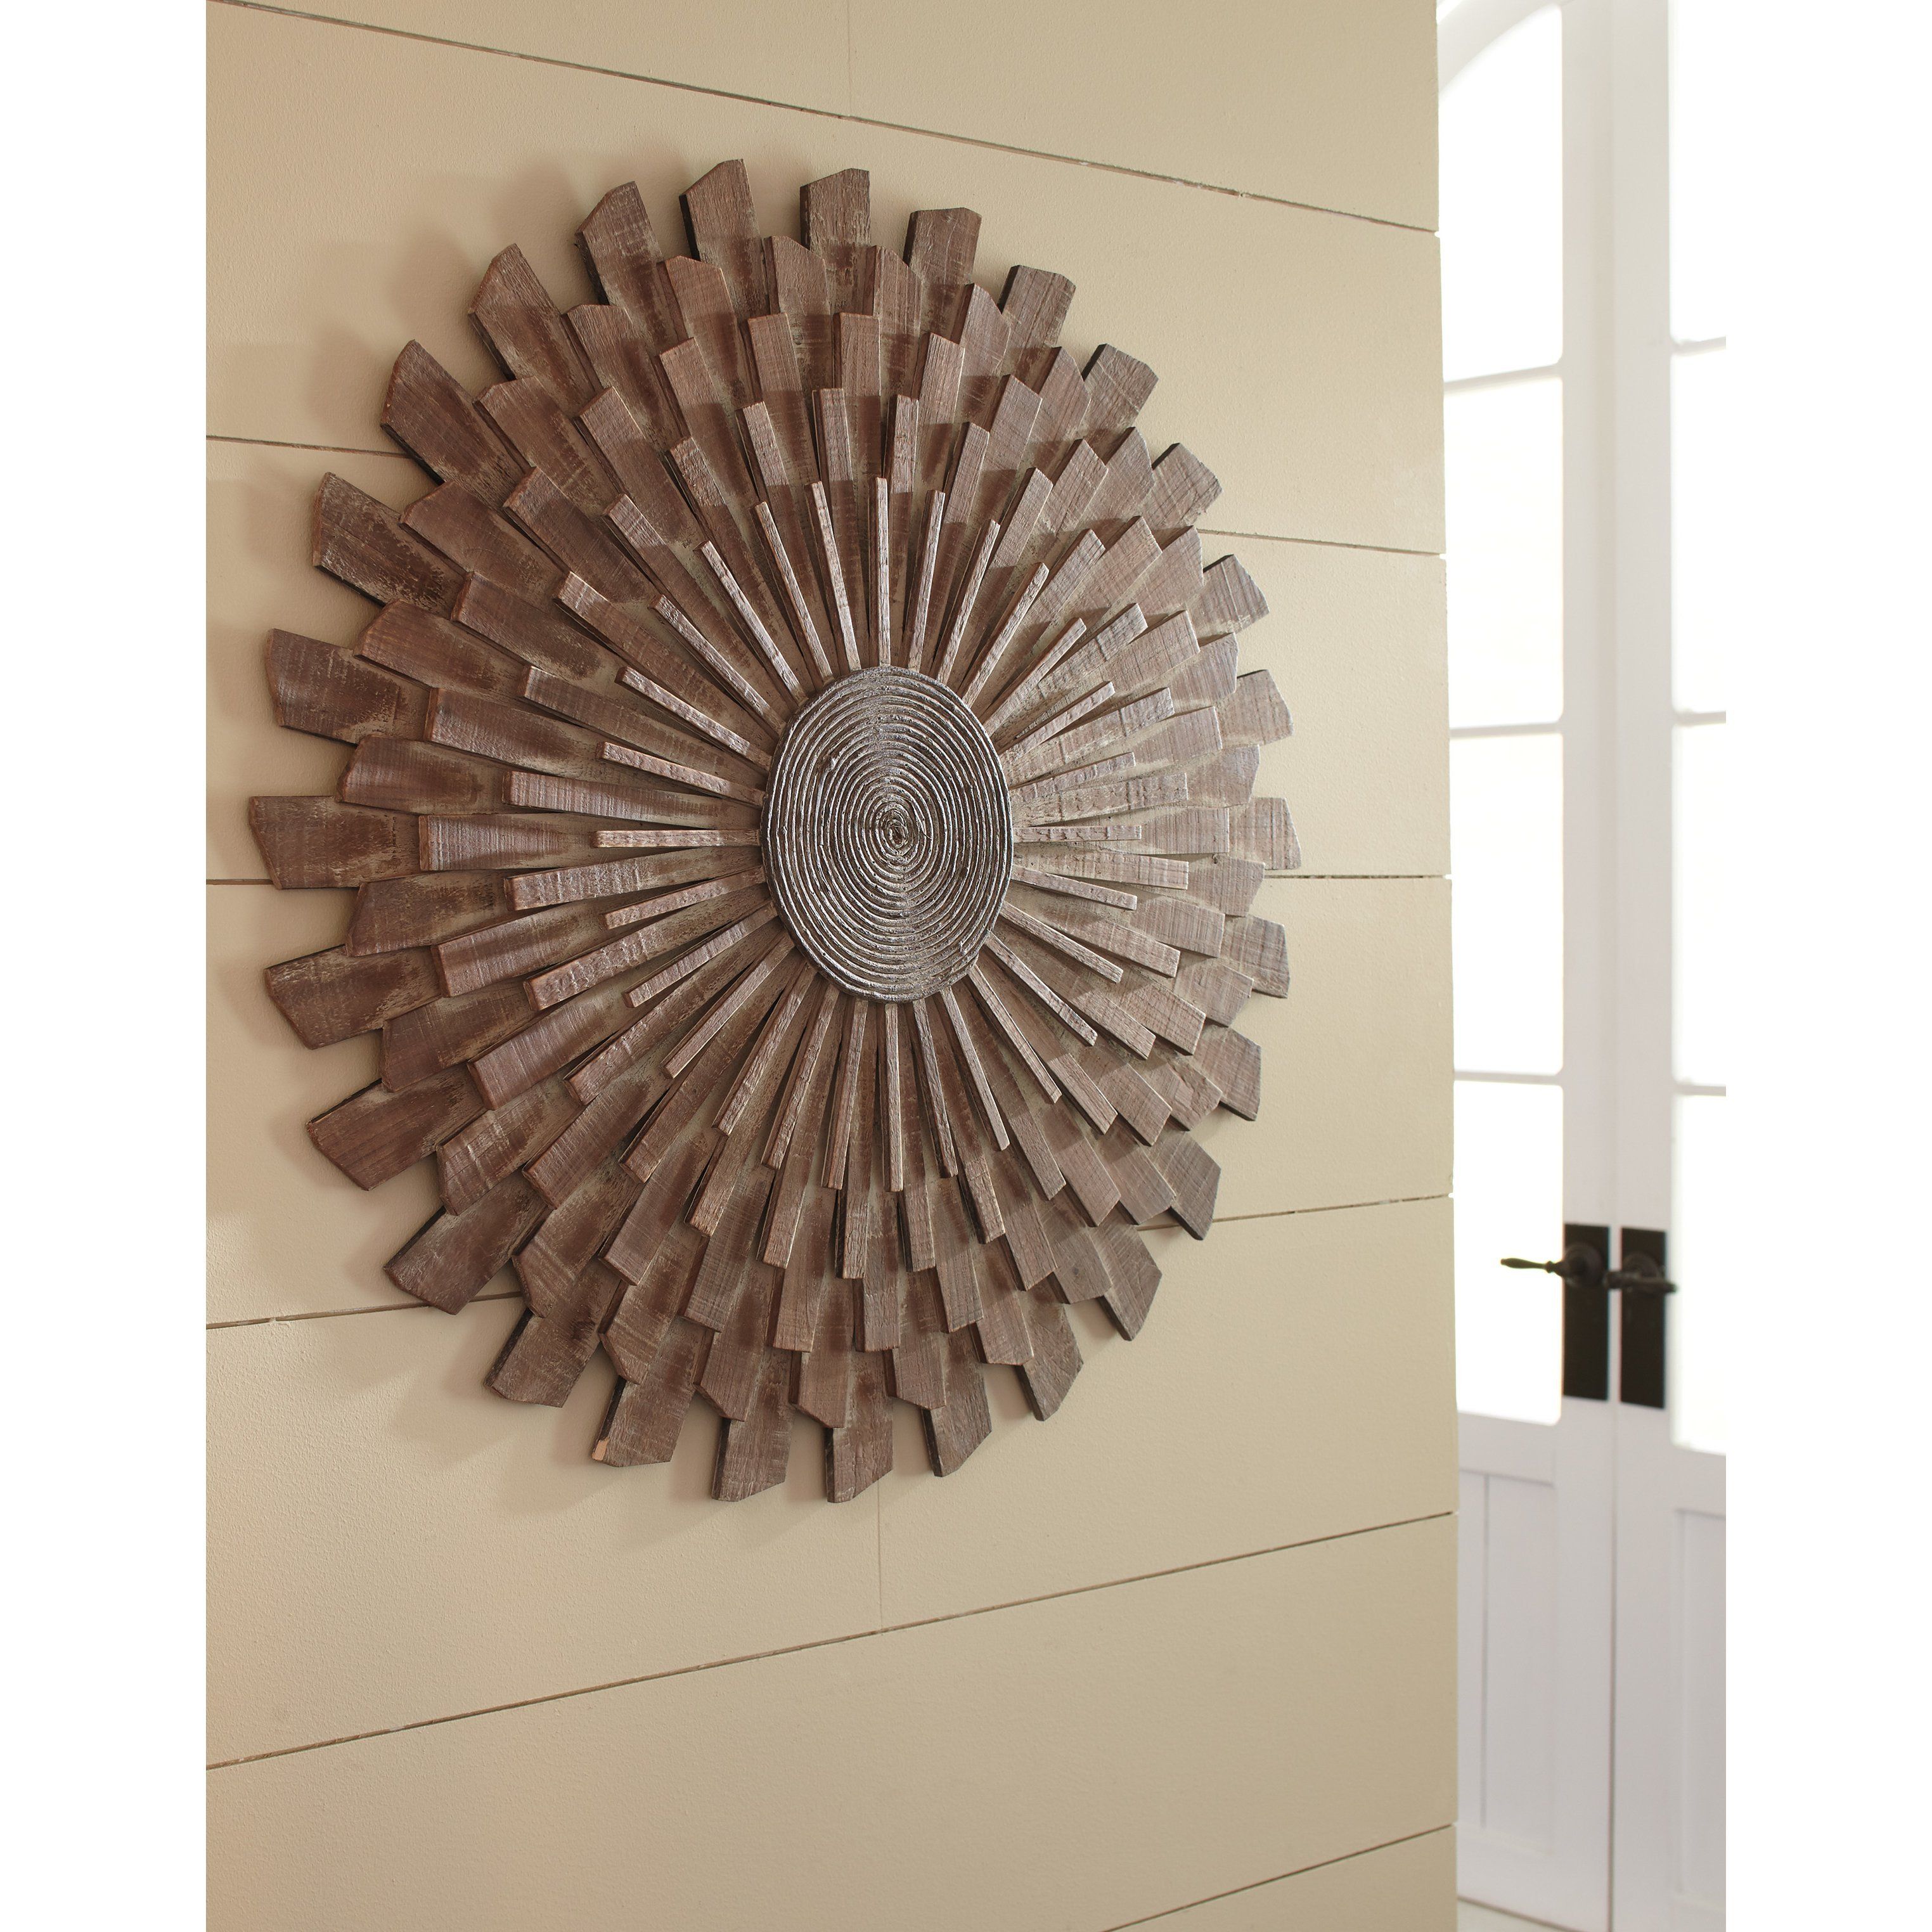 Most Current Sunburst Wall Decor – Pmpresssecretariat With Wall Decor By World Menagerie (View 8 of 20)